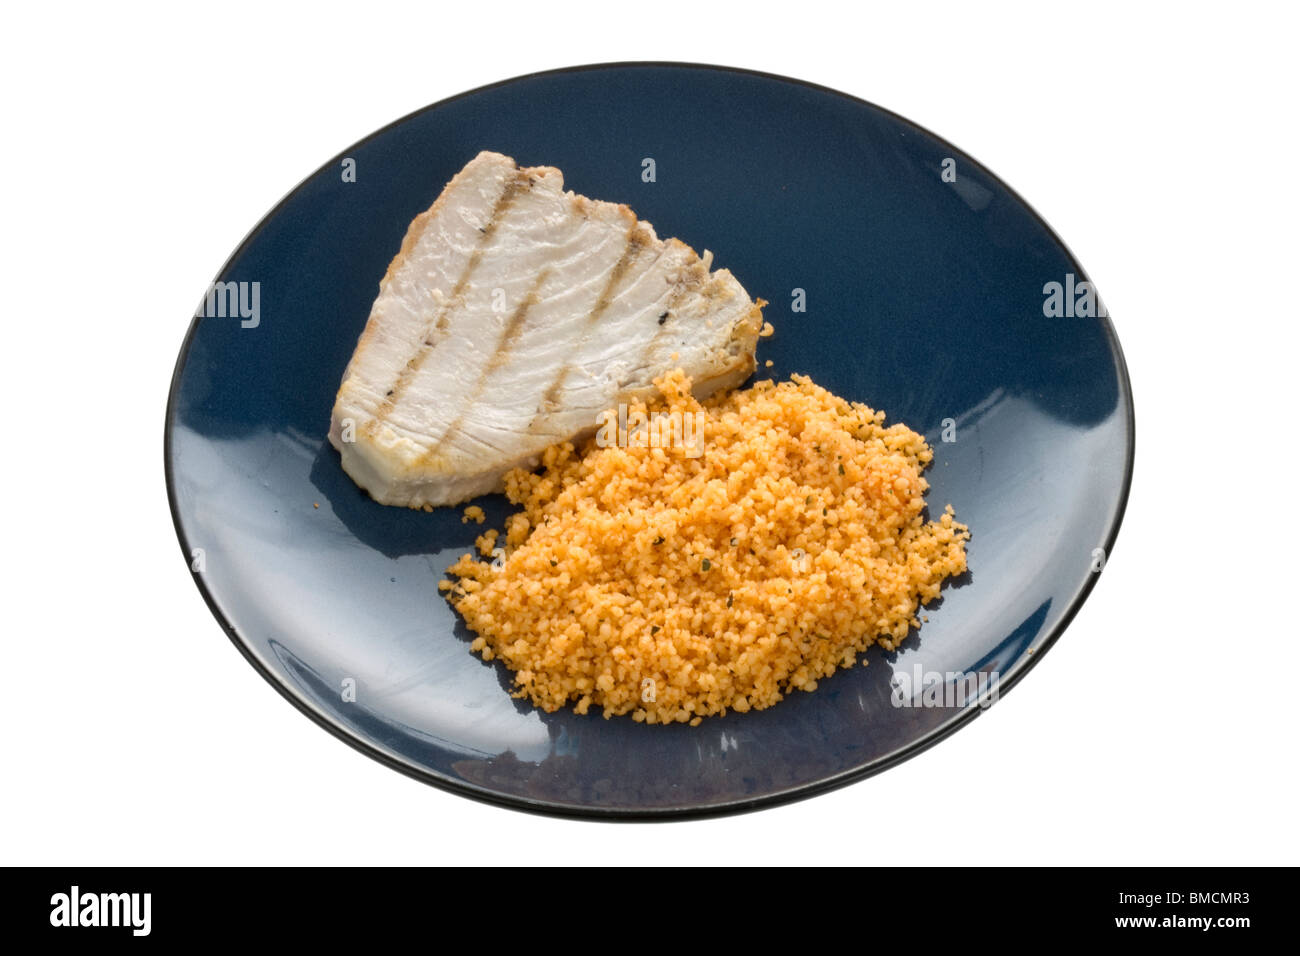 Tuna Steak with Cous Cous Stock Photo